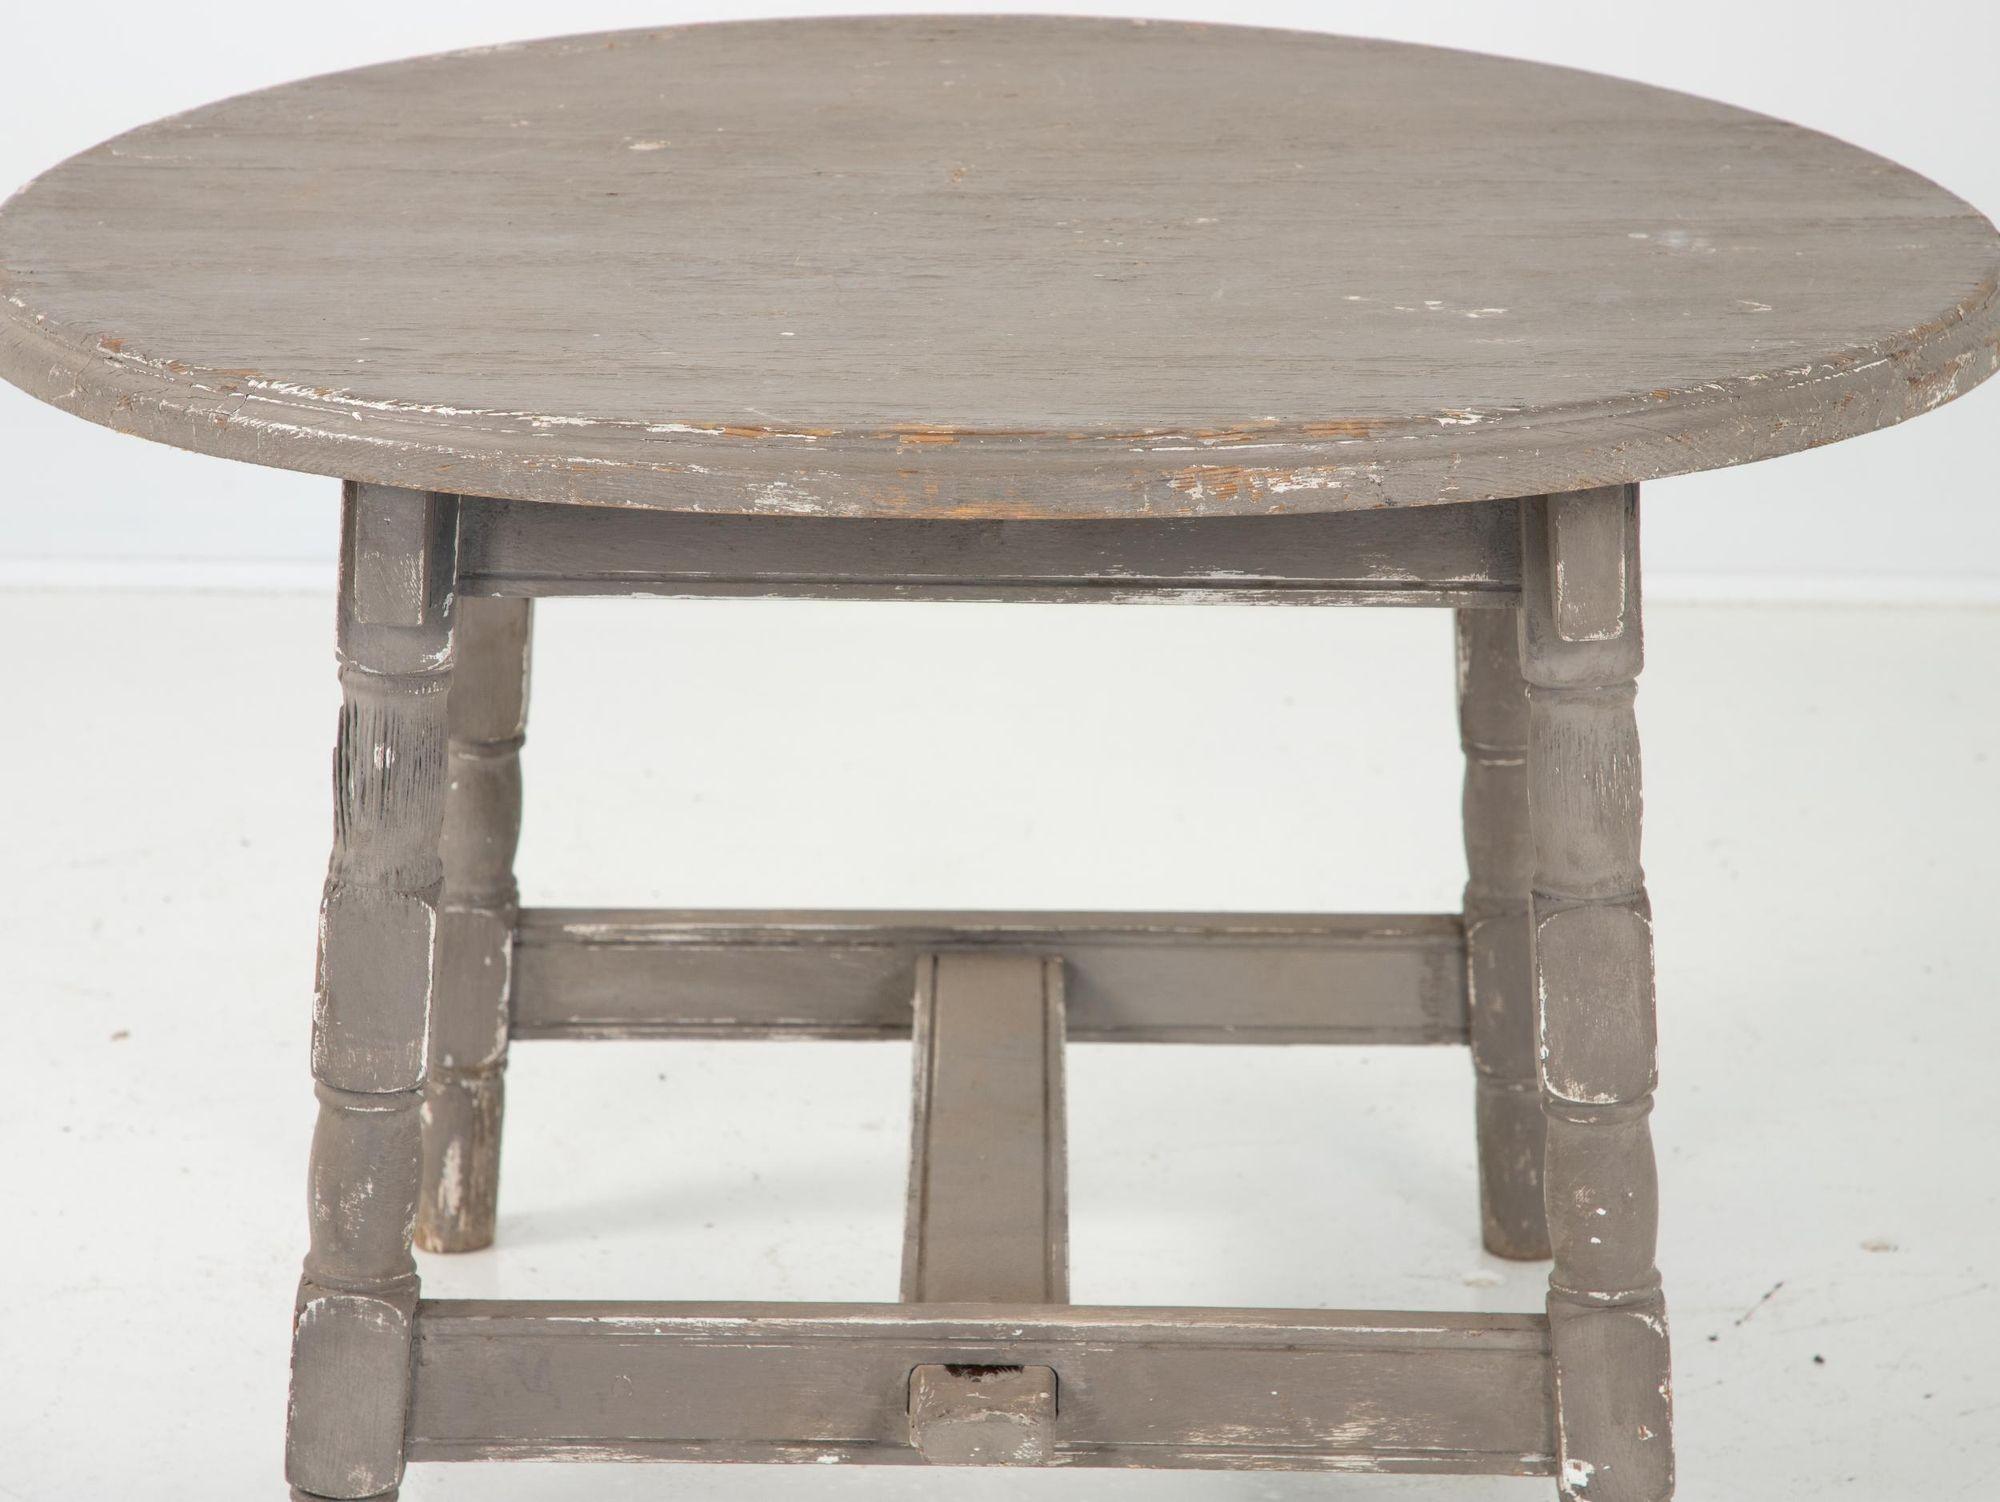 A painted grey low table in a rustic country style. Stretcher across four legs. Early 20th century with recent paint. The top needs to be repaired as it is bowed.